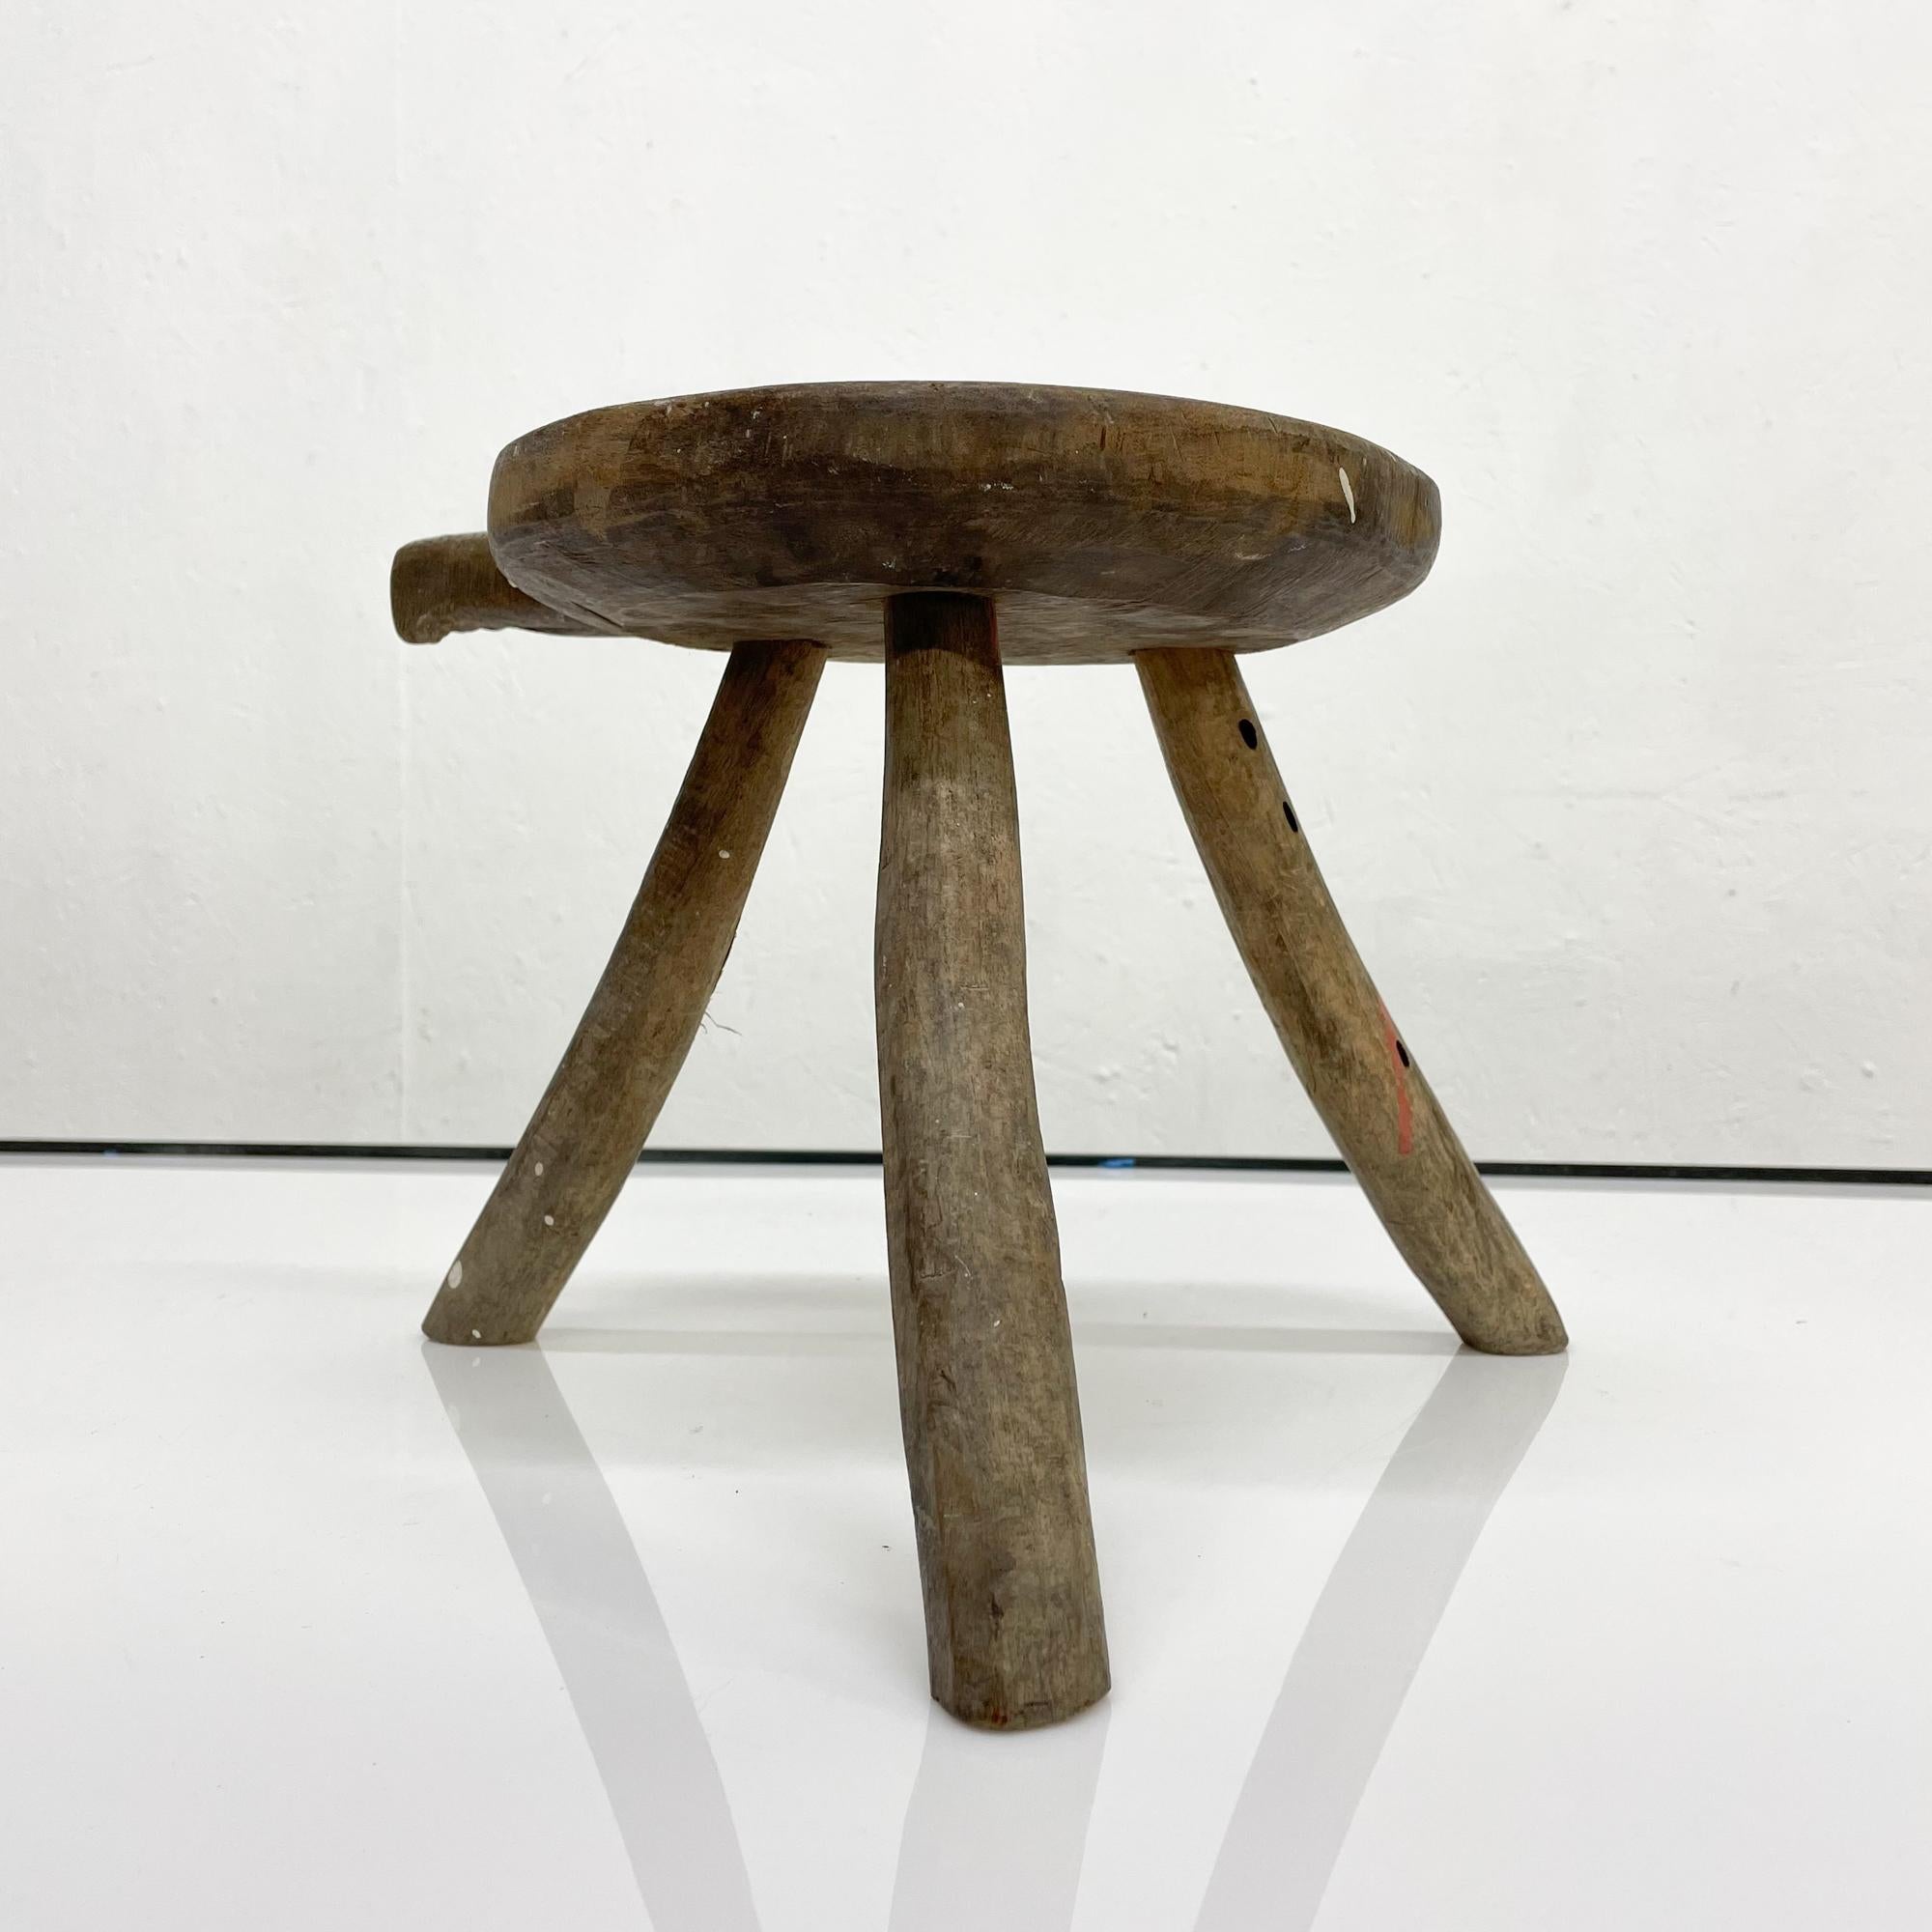 Early 20th Century Antique Mesquite Wood Tripod Decorative Stool For Sale